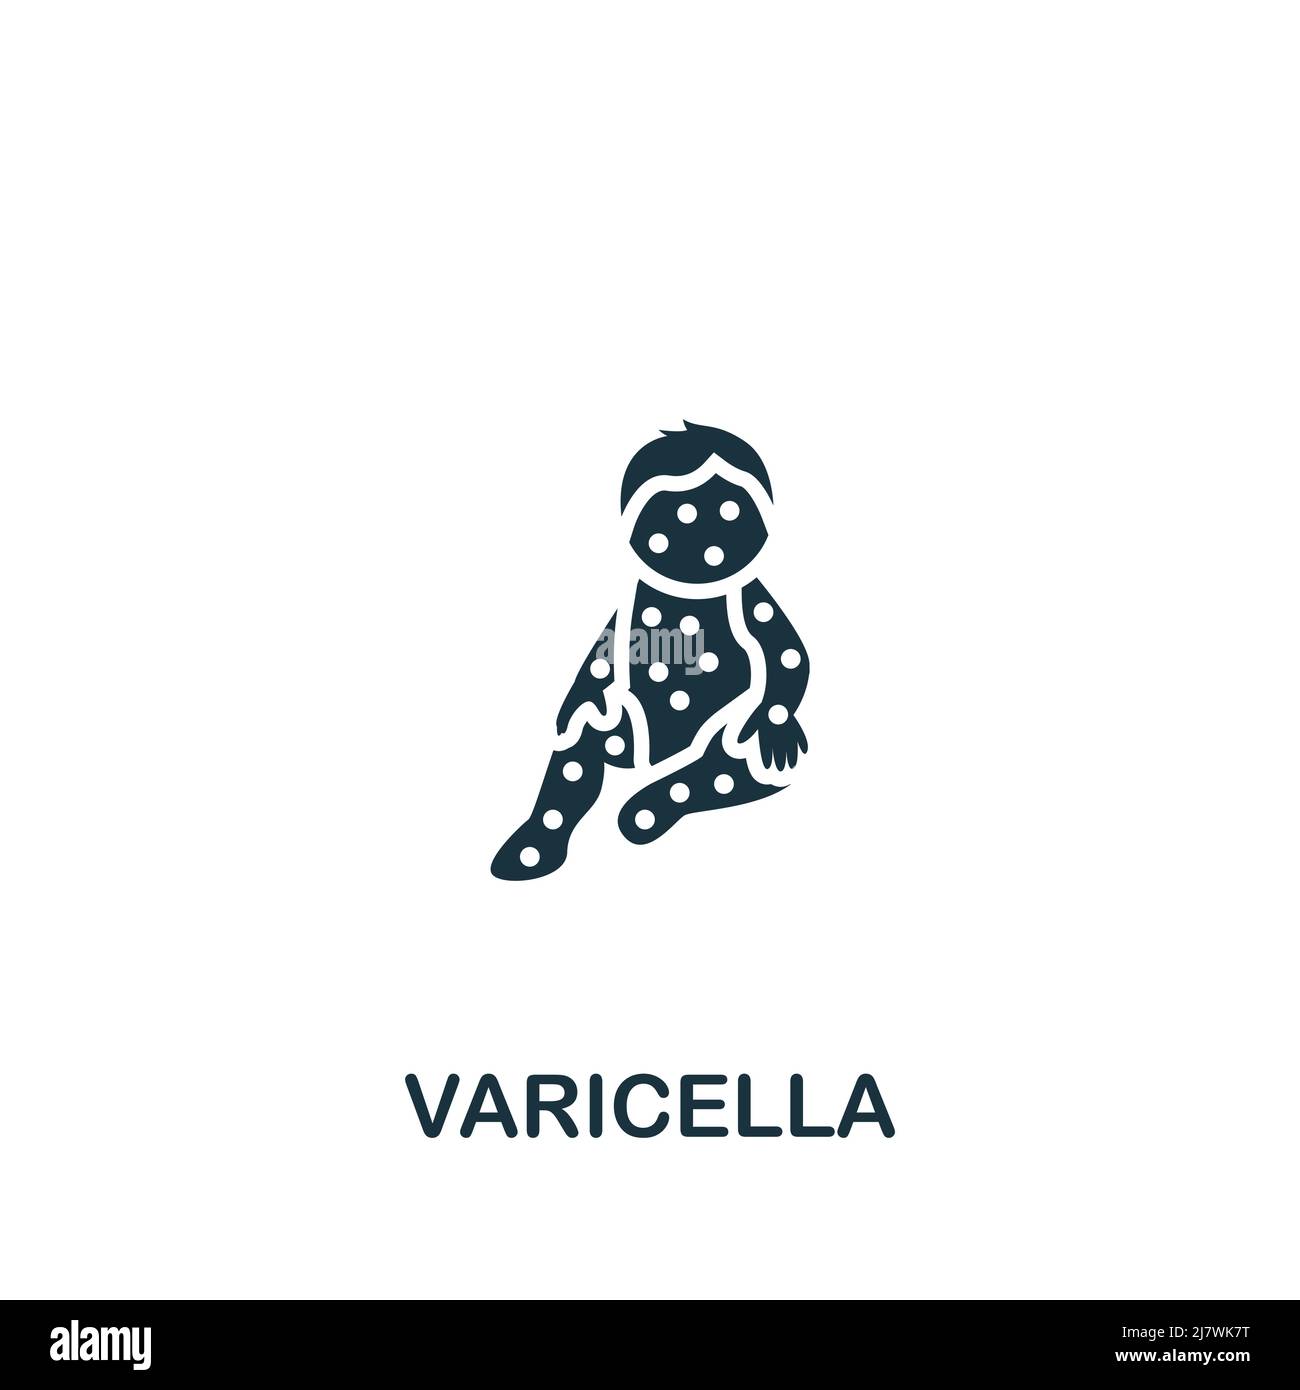 Varicella icon. Monochrome simple Deseases icon for templates, web design and infographics Stock Vector